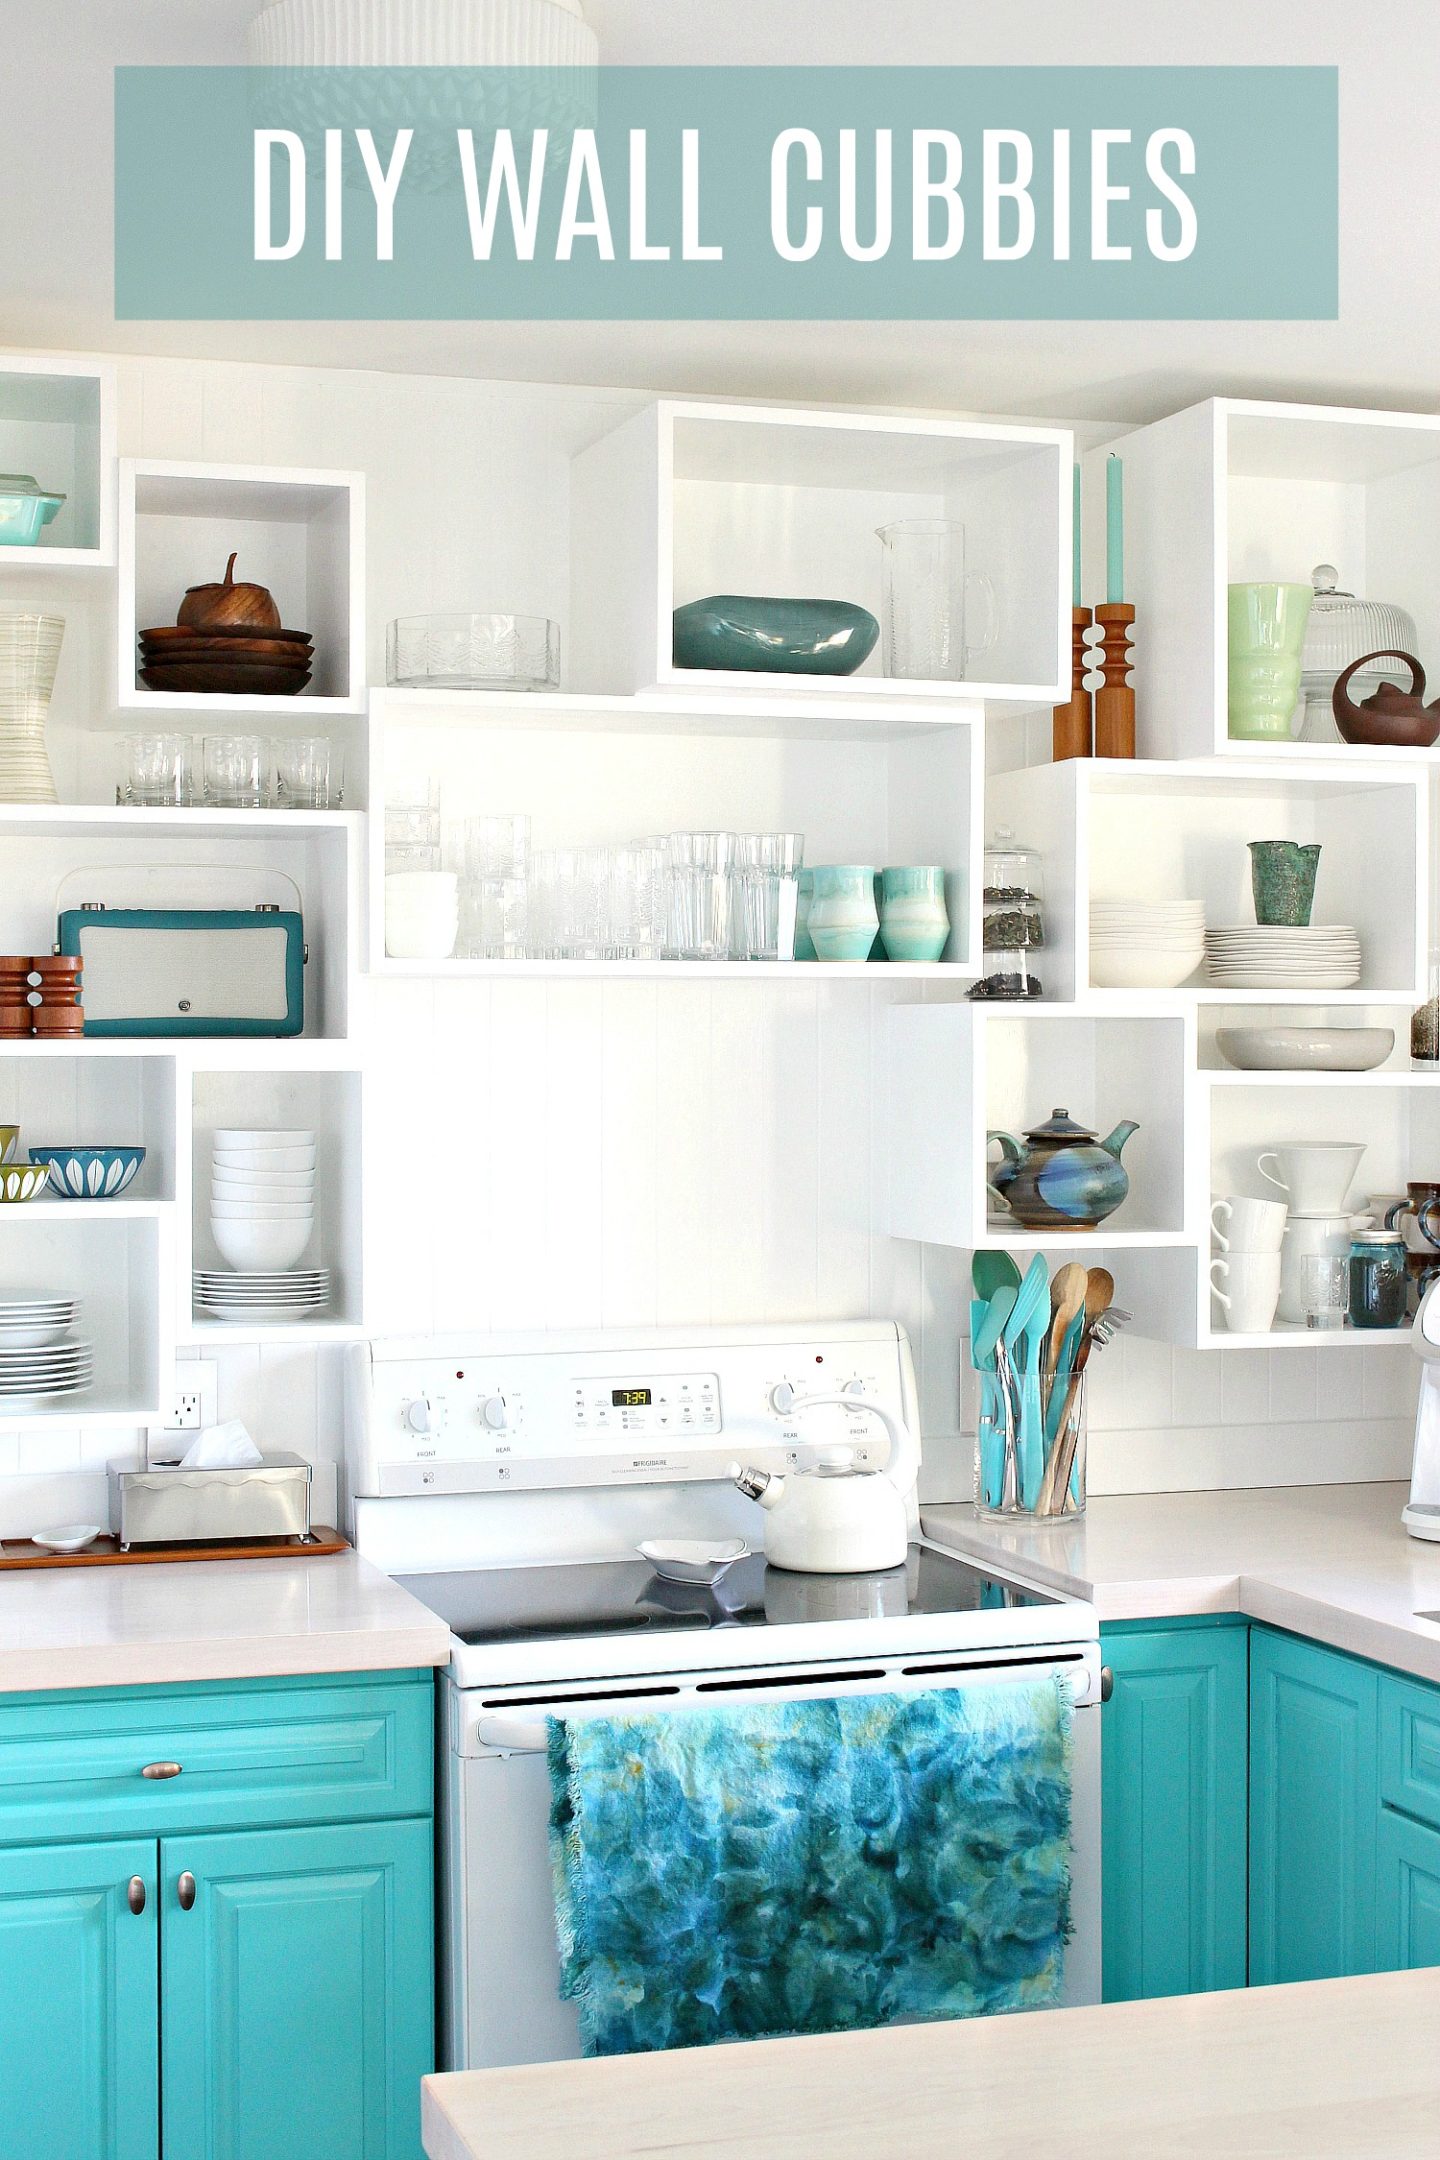 Learn how to build and install these DIY wall cubbies - a great way to add custom storage anywhere and a fun alternative to open shelving in the kitchen!